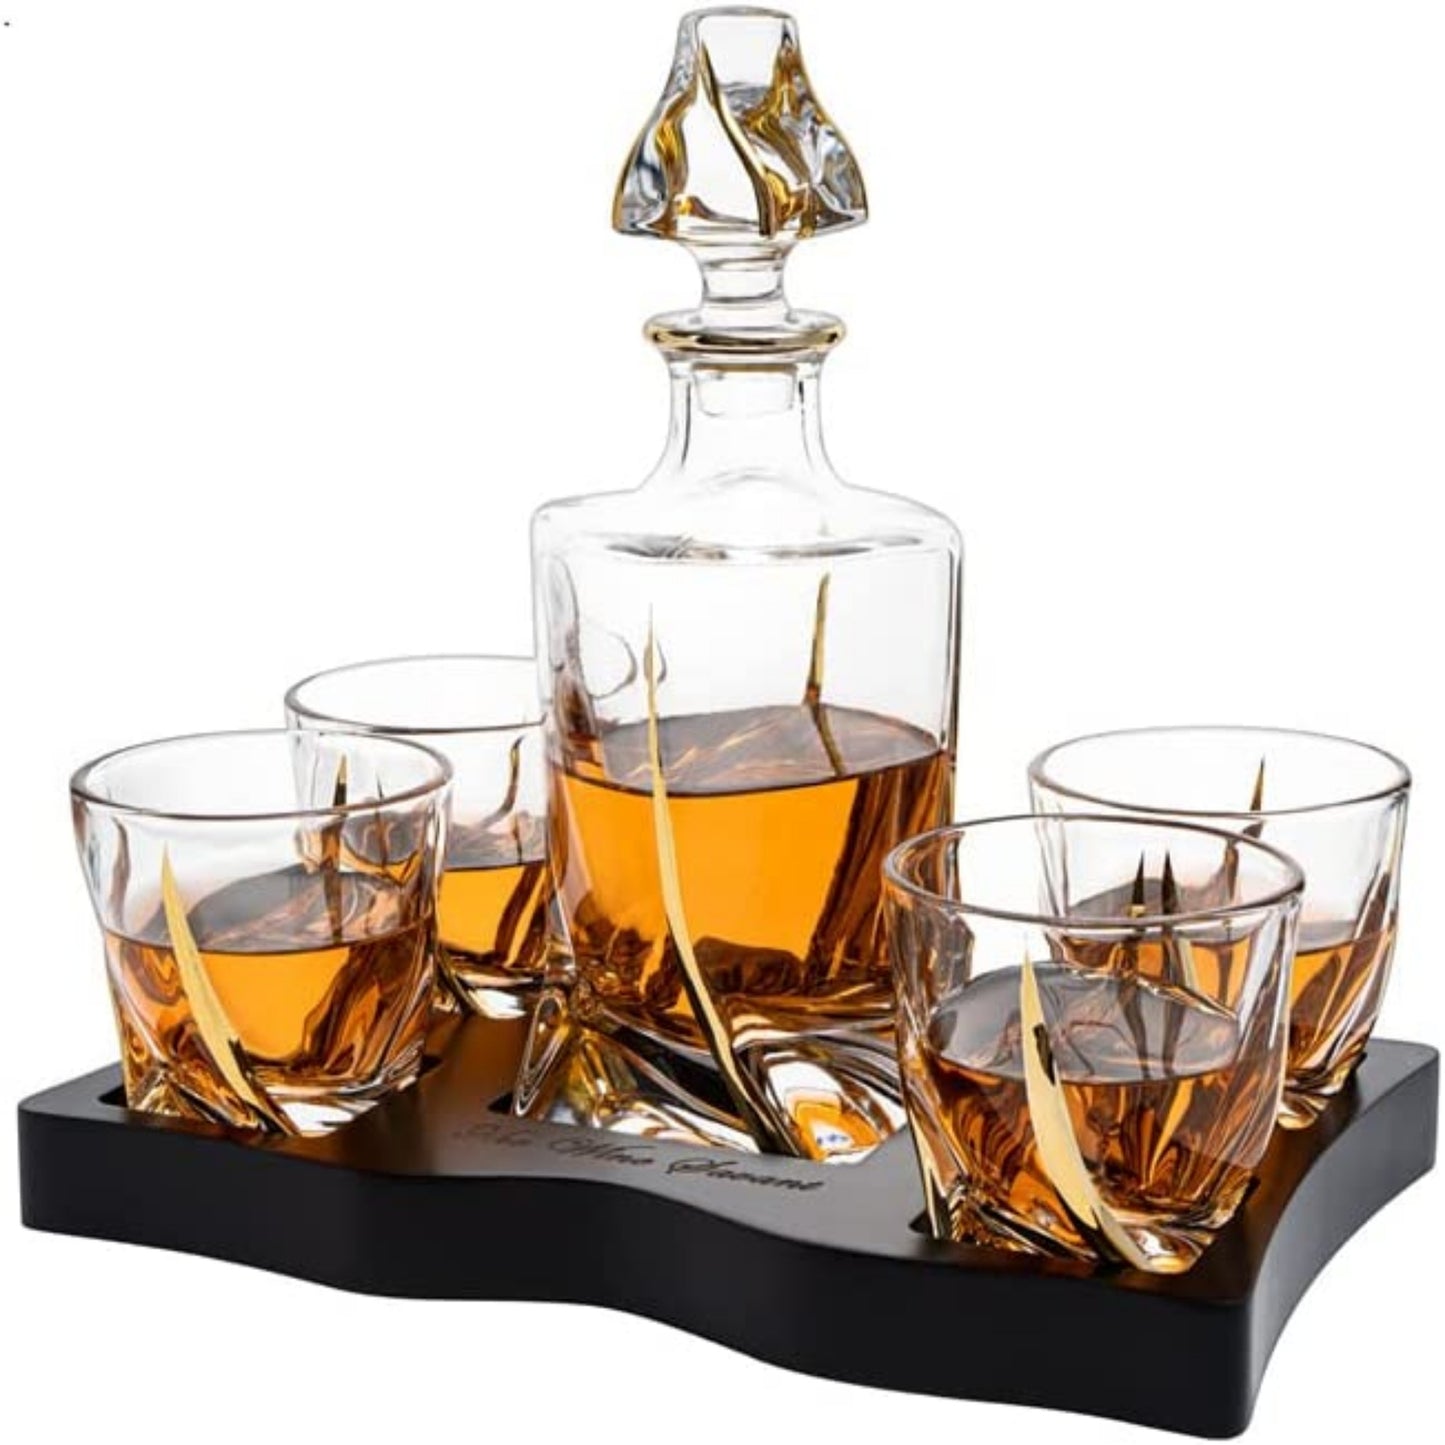 European Style Gold Wine & Whiskey Gold Twist Spiral Decanter 855ml with 4 Glasses & Wood Tray Set by The Wine Savant - Liquor Geeks